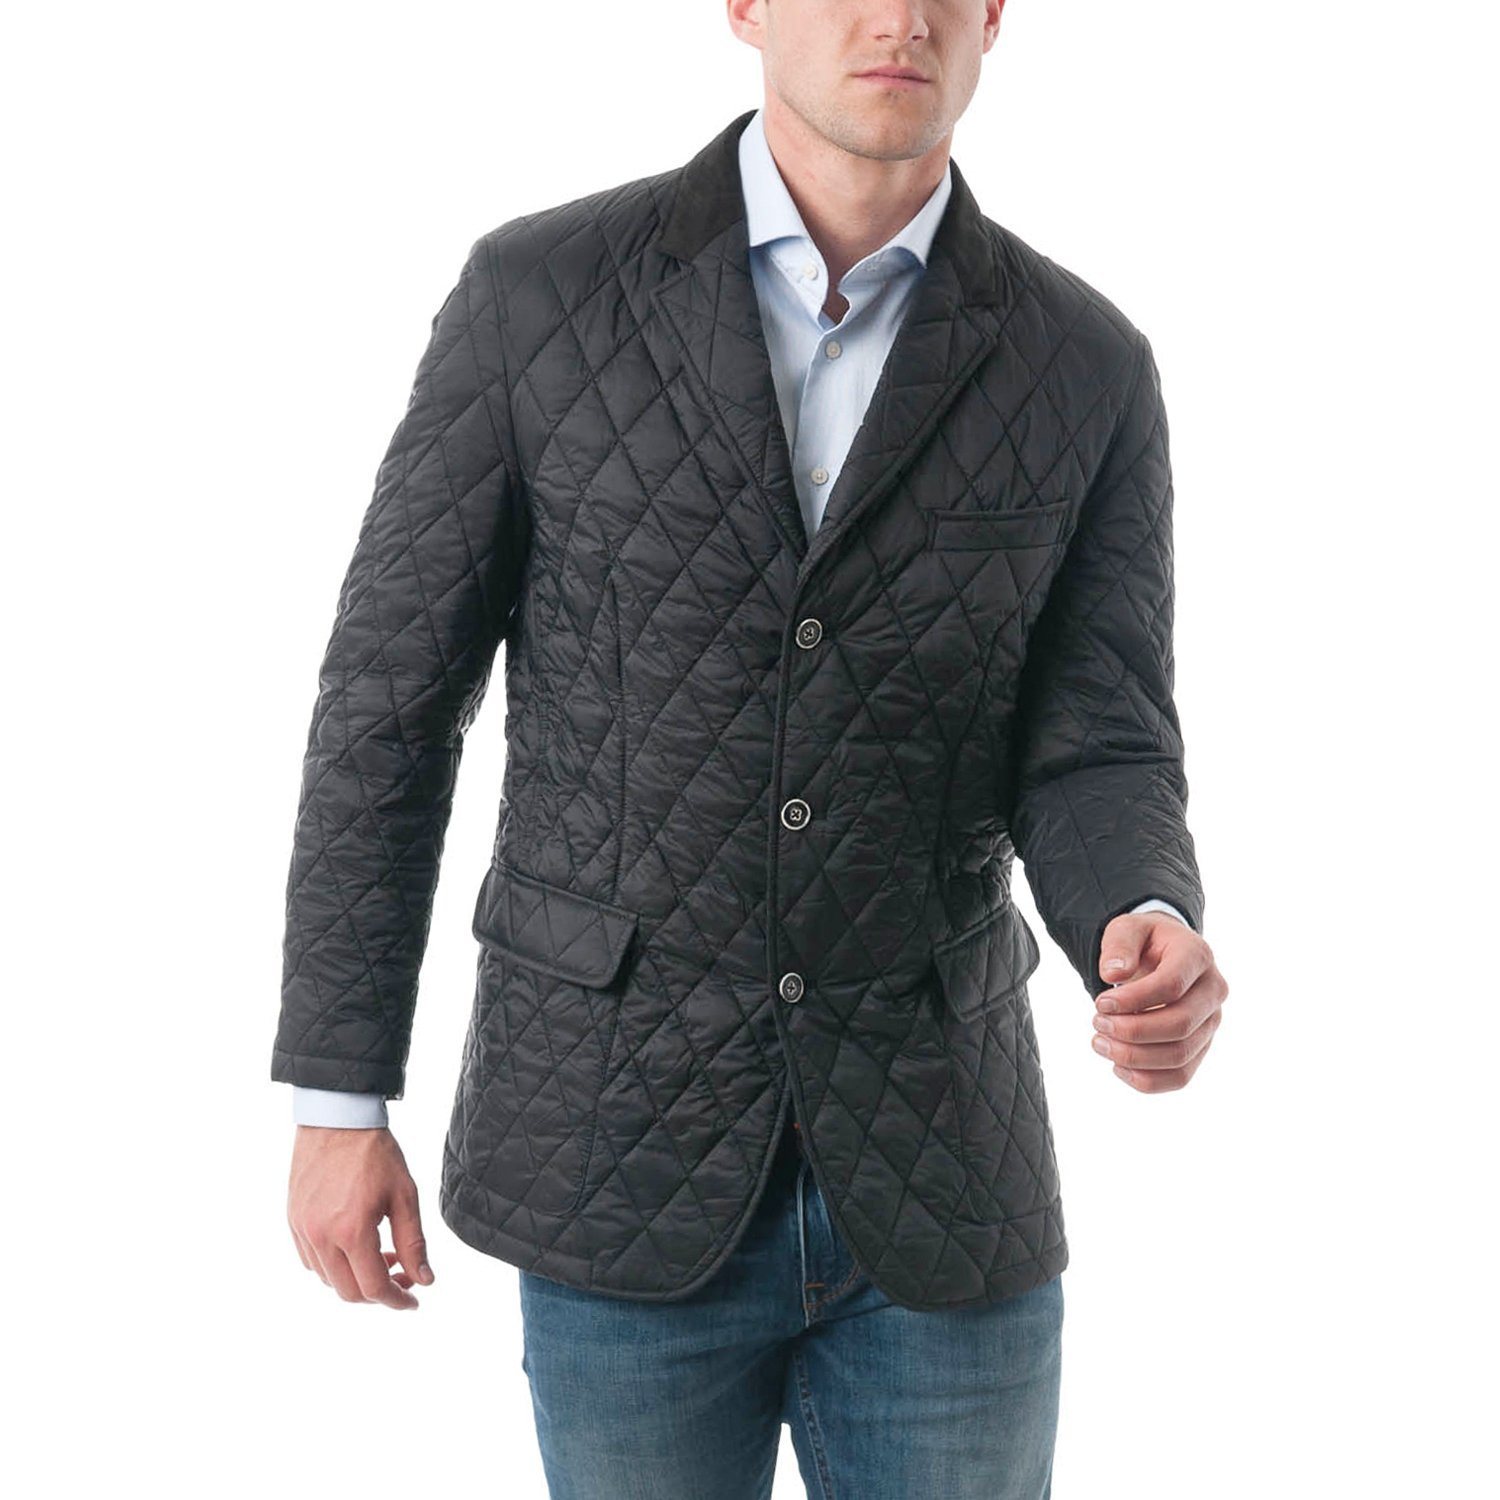 Xiaolv88 Men’ S Quilted Classic Fit Notched Lapel Blazer Jacket